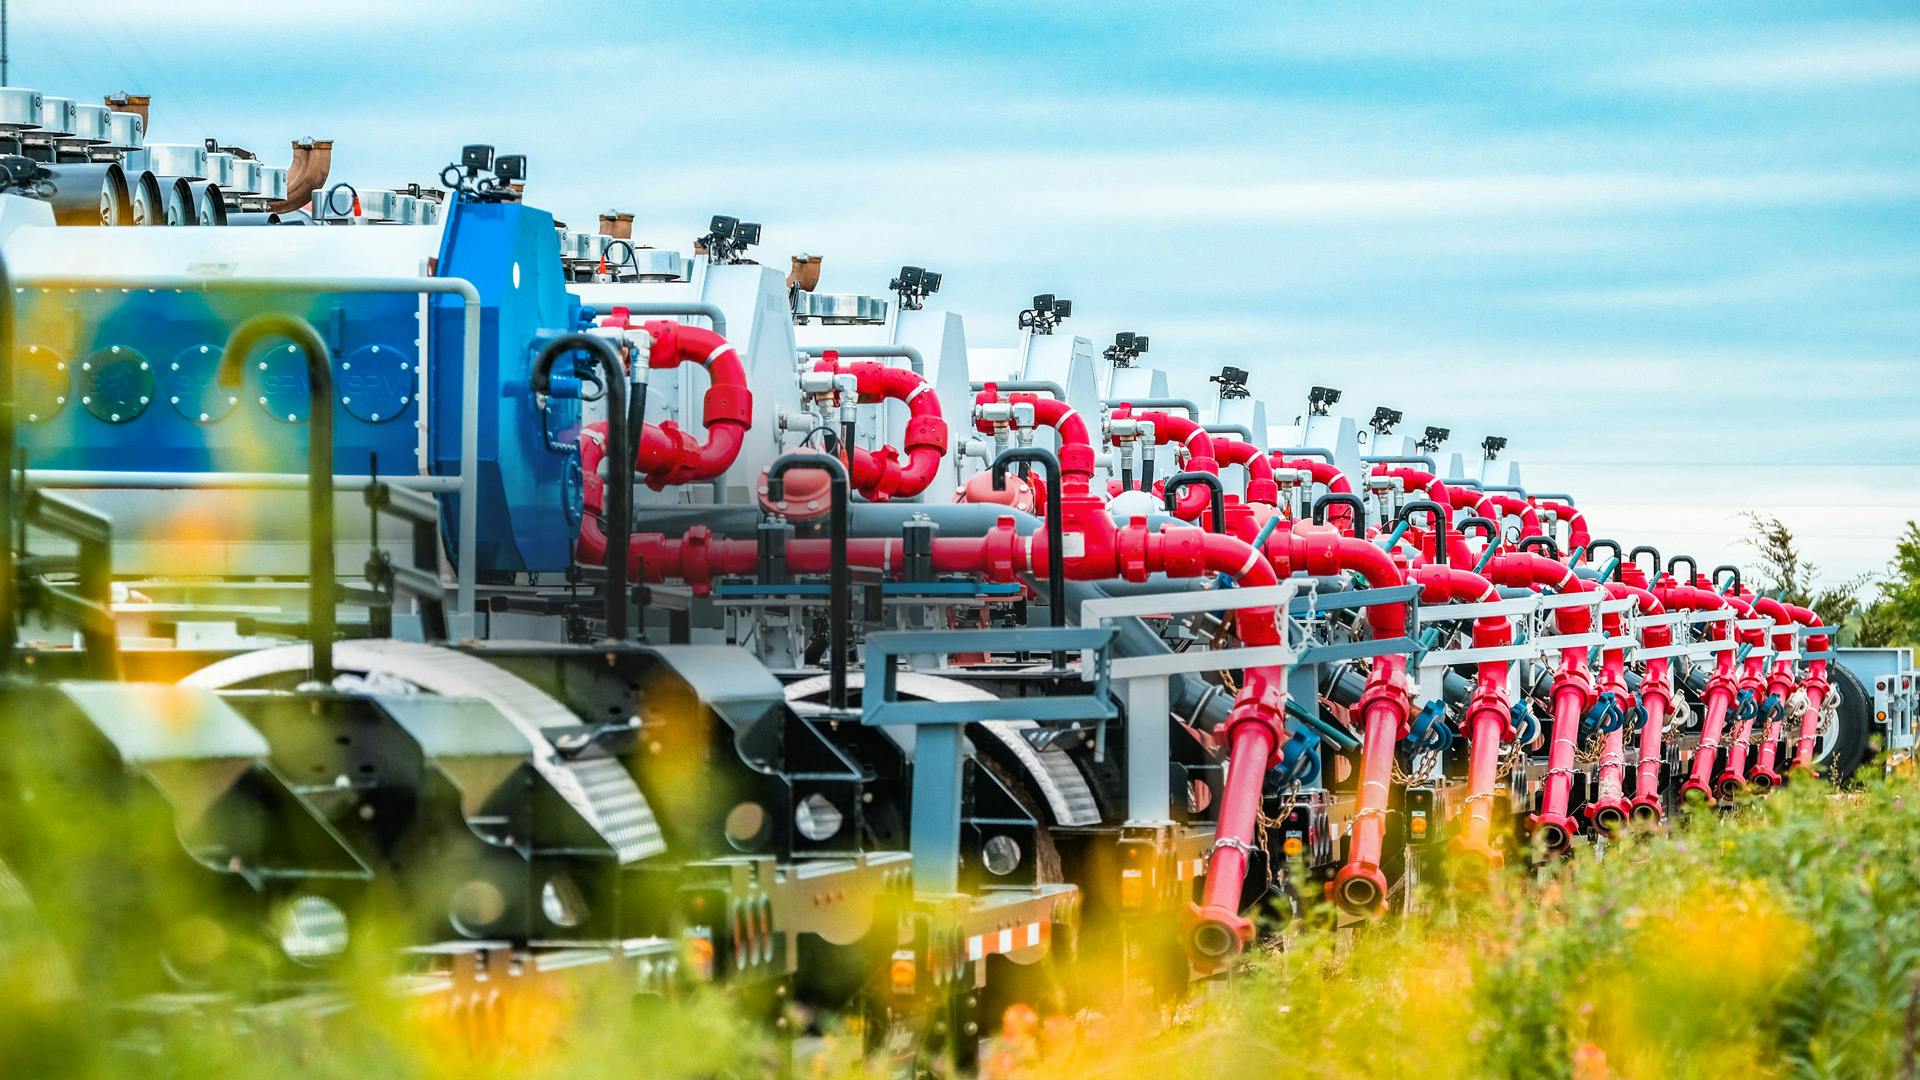 Roll-on units in a colorful field of flowers